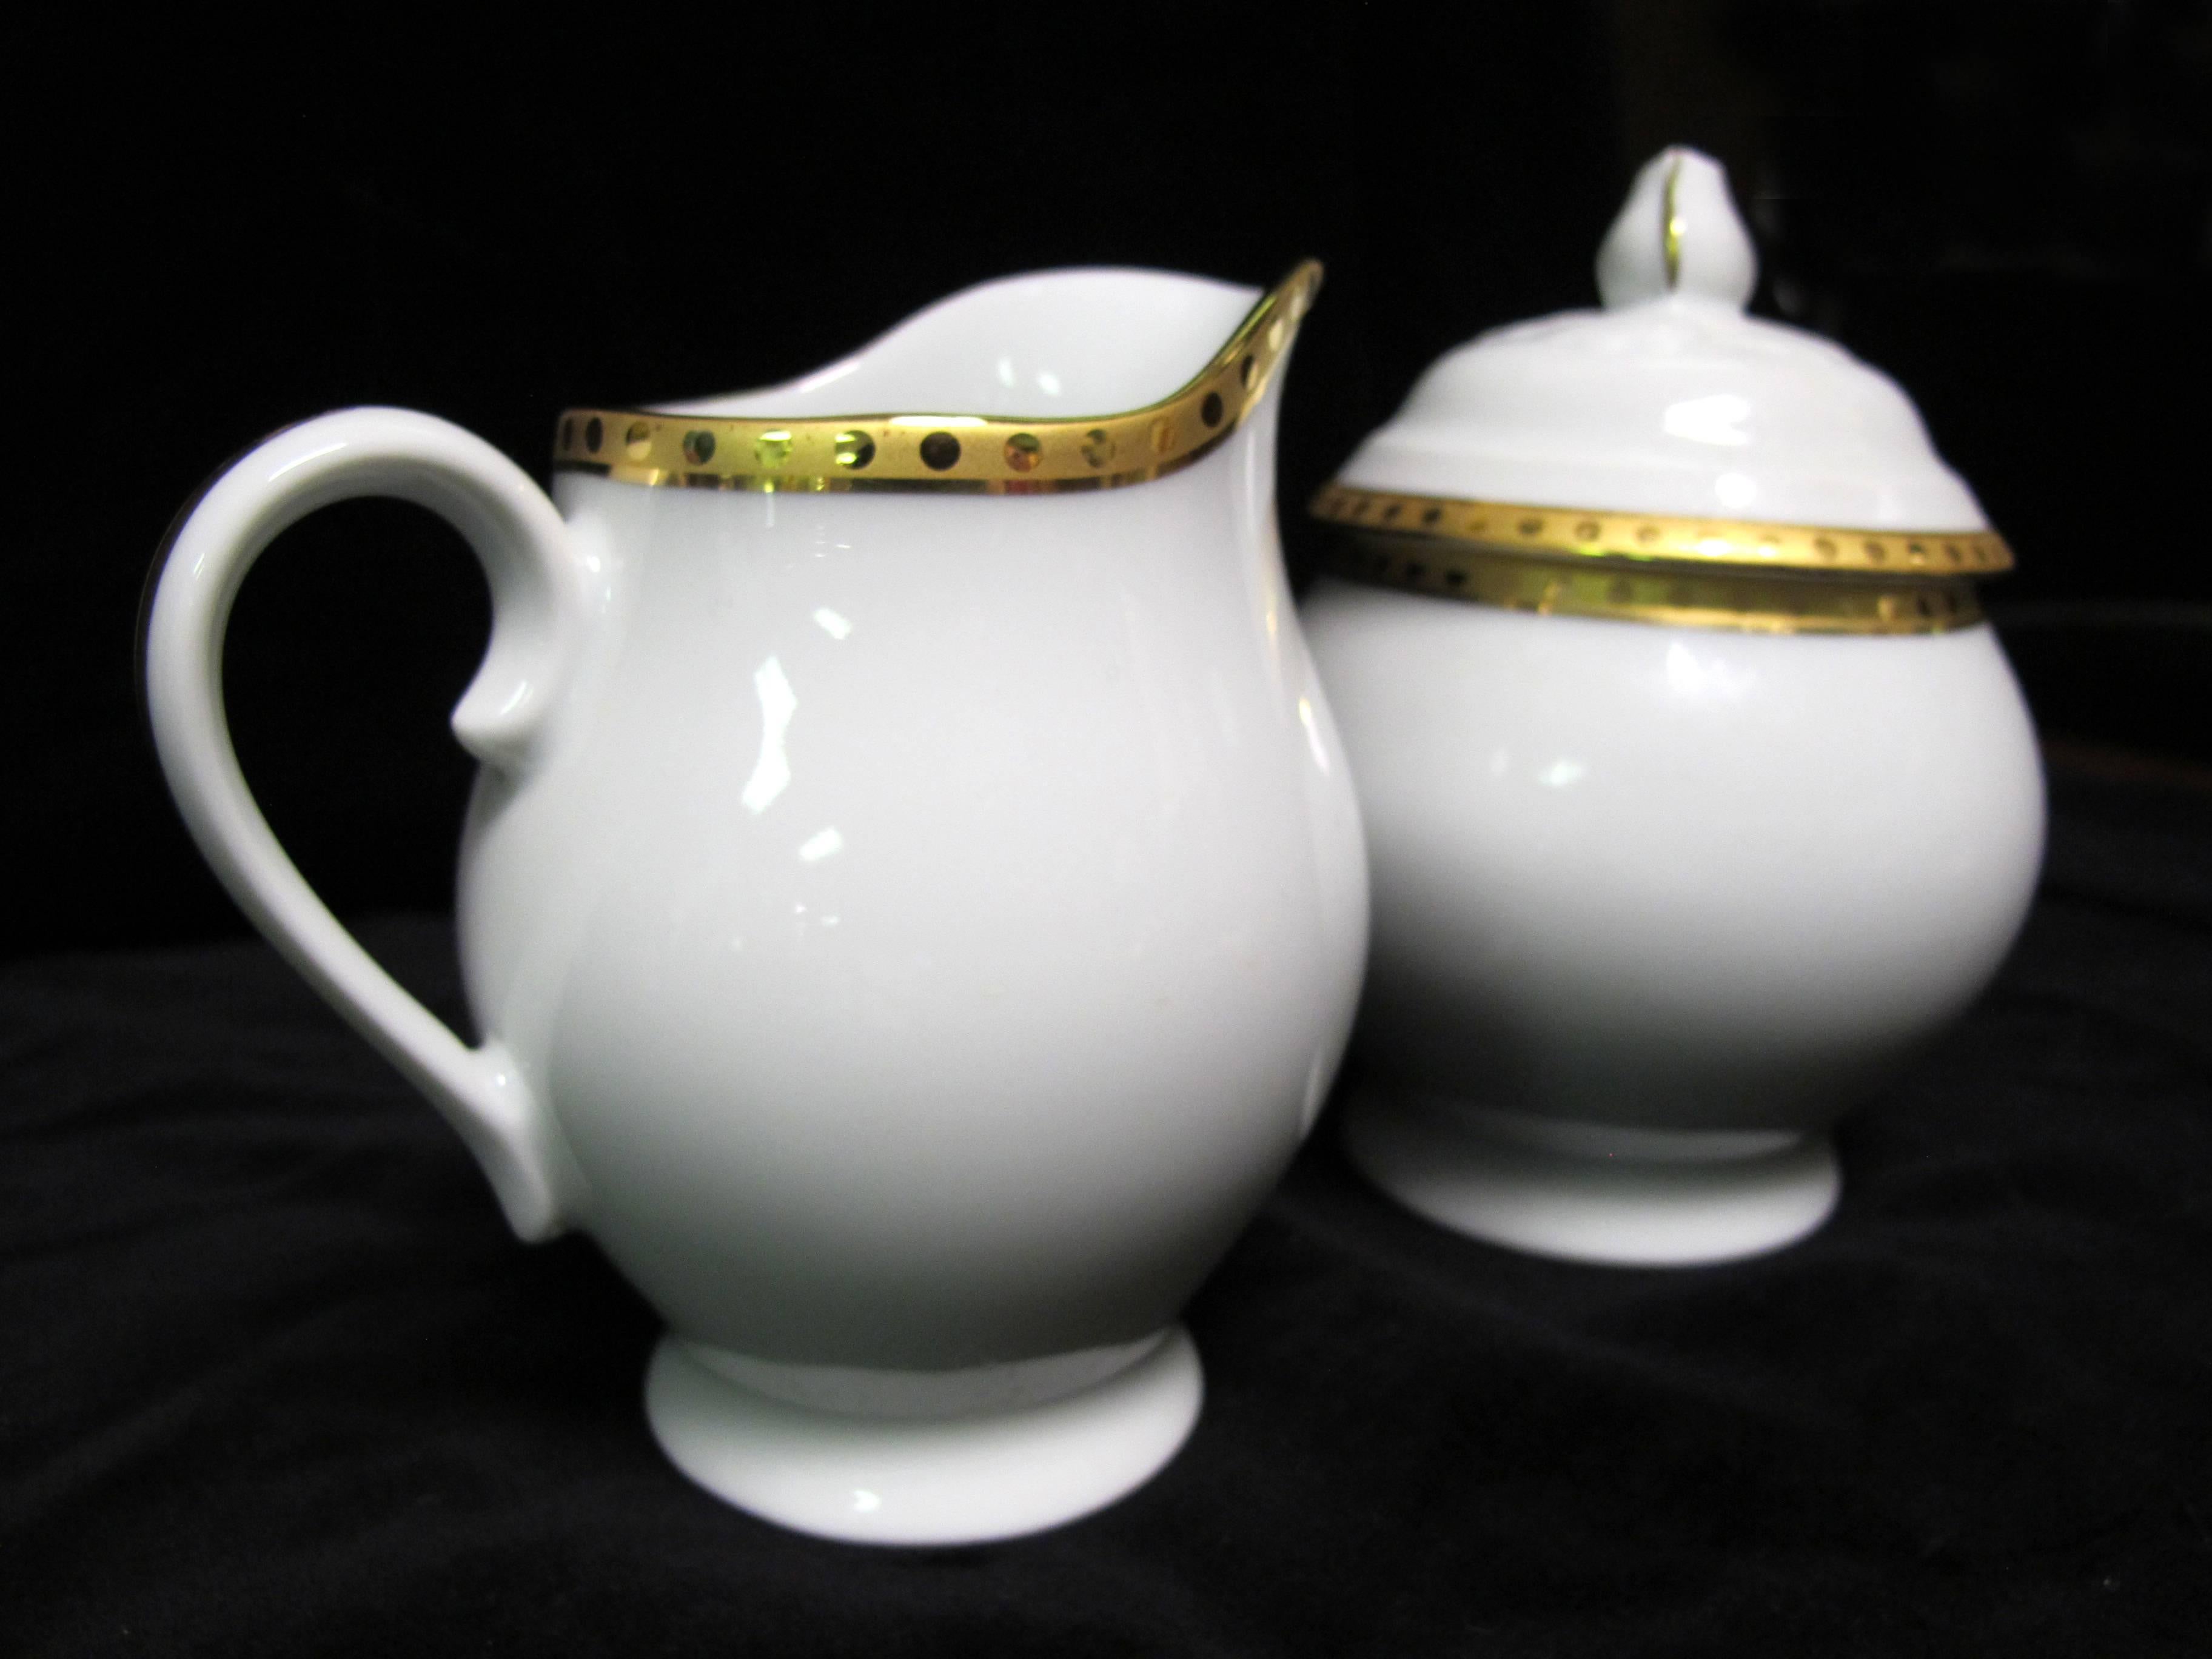 Tiffany & Co. Sugar and Creamer with Lid. 
In perfect condition.
Measures: Sugar: 4 x 4 x 5.5